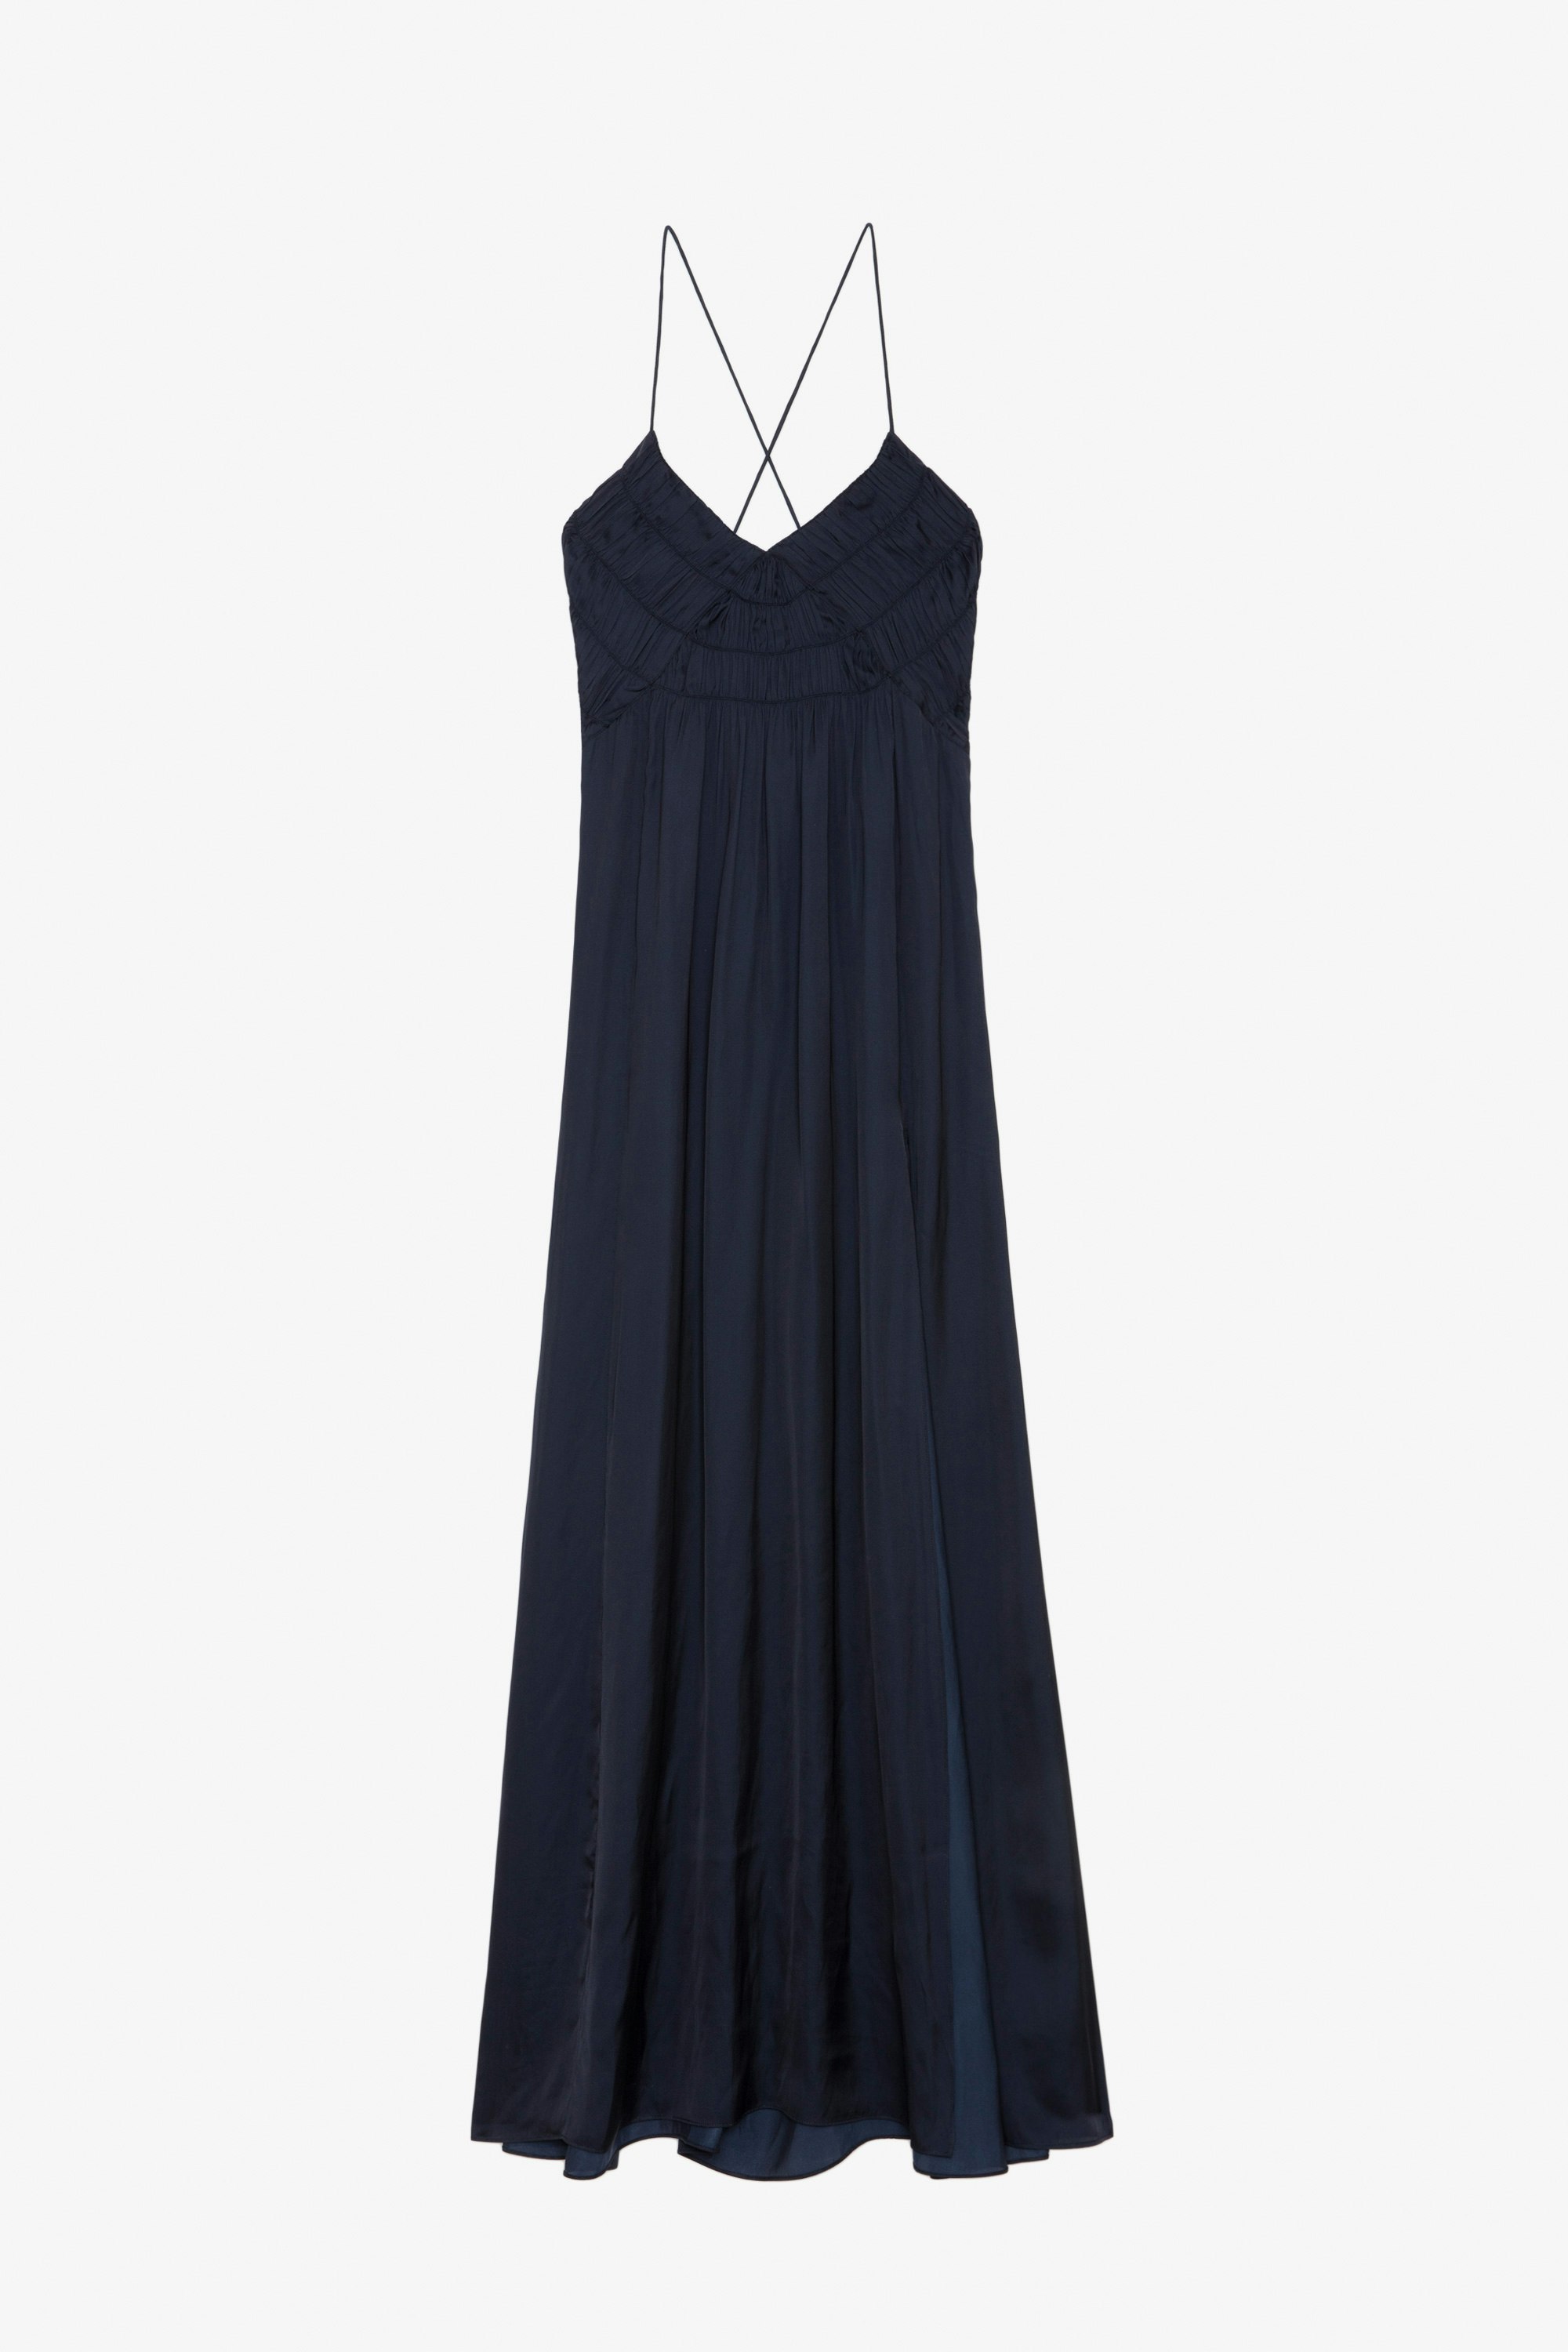 Rayonne Satin Dress - Navy blue satin long lingerie-style dress with straps, split on the skirt and elaborate front.